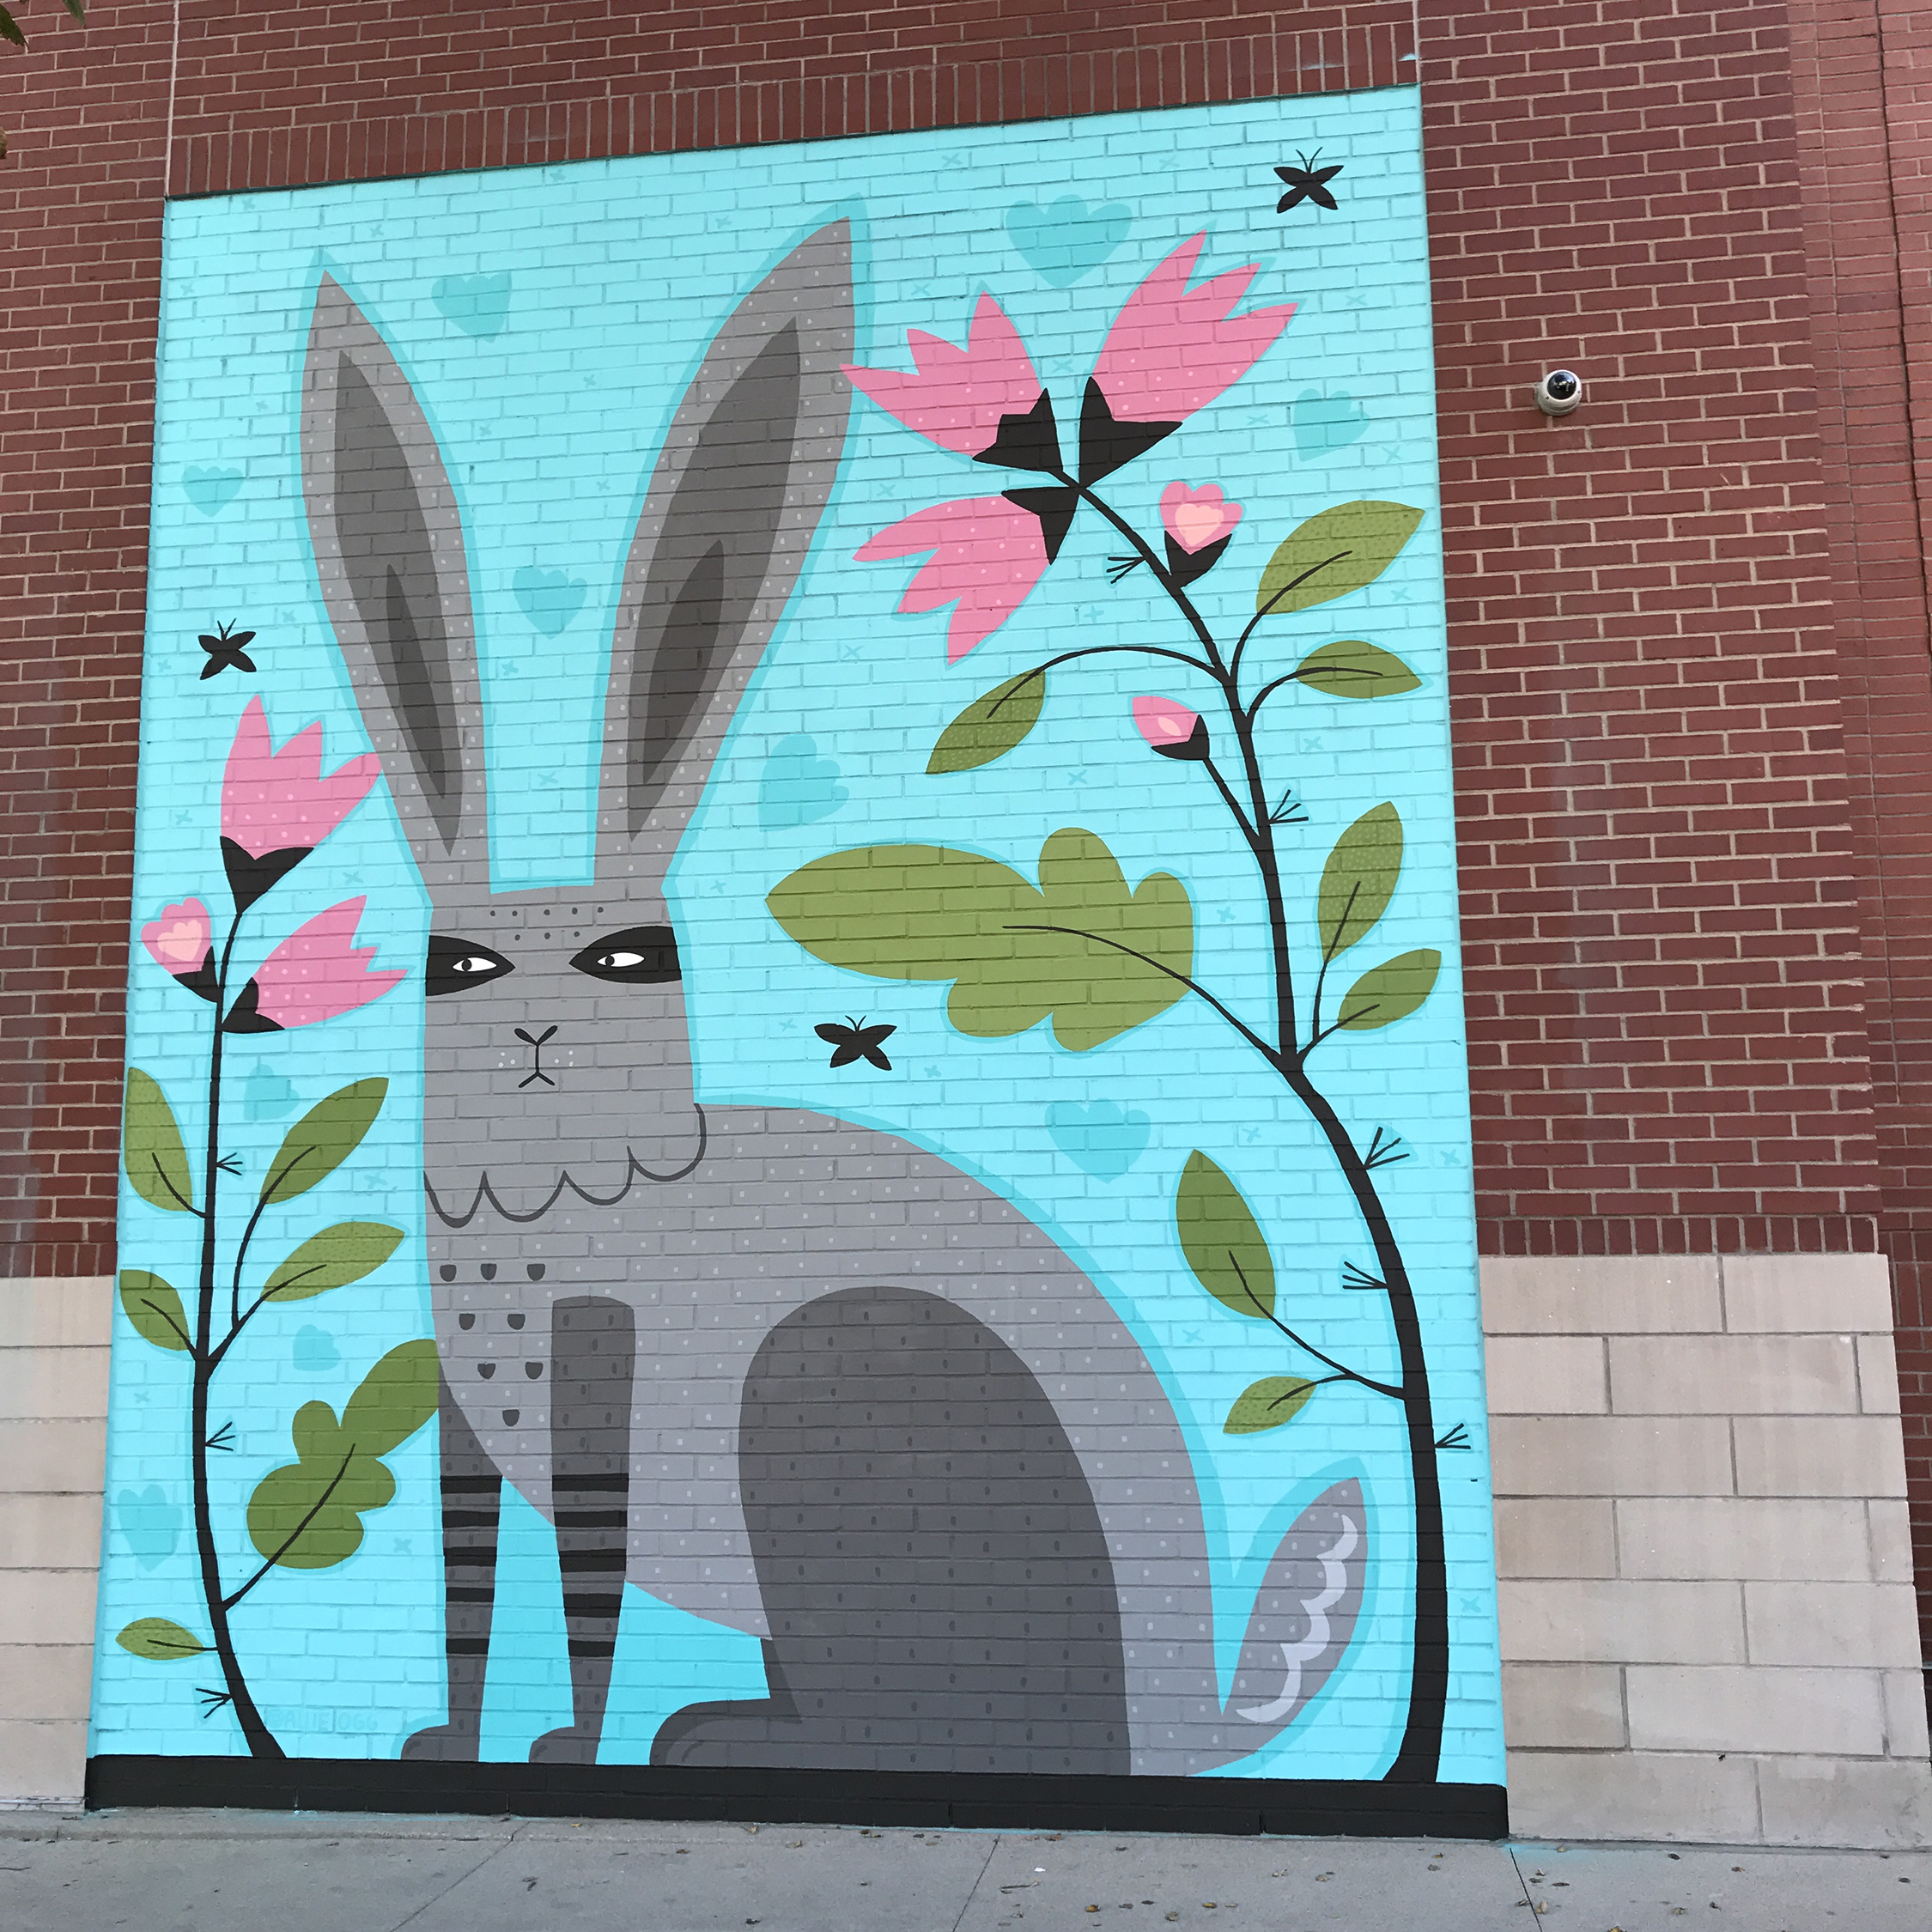 Mural on Uncommon Apartments in Fort Collins